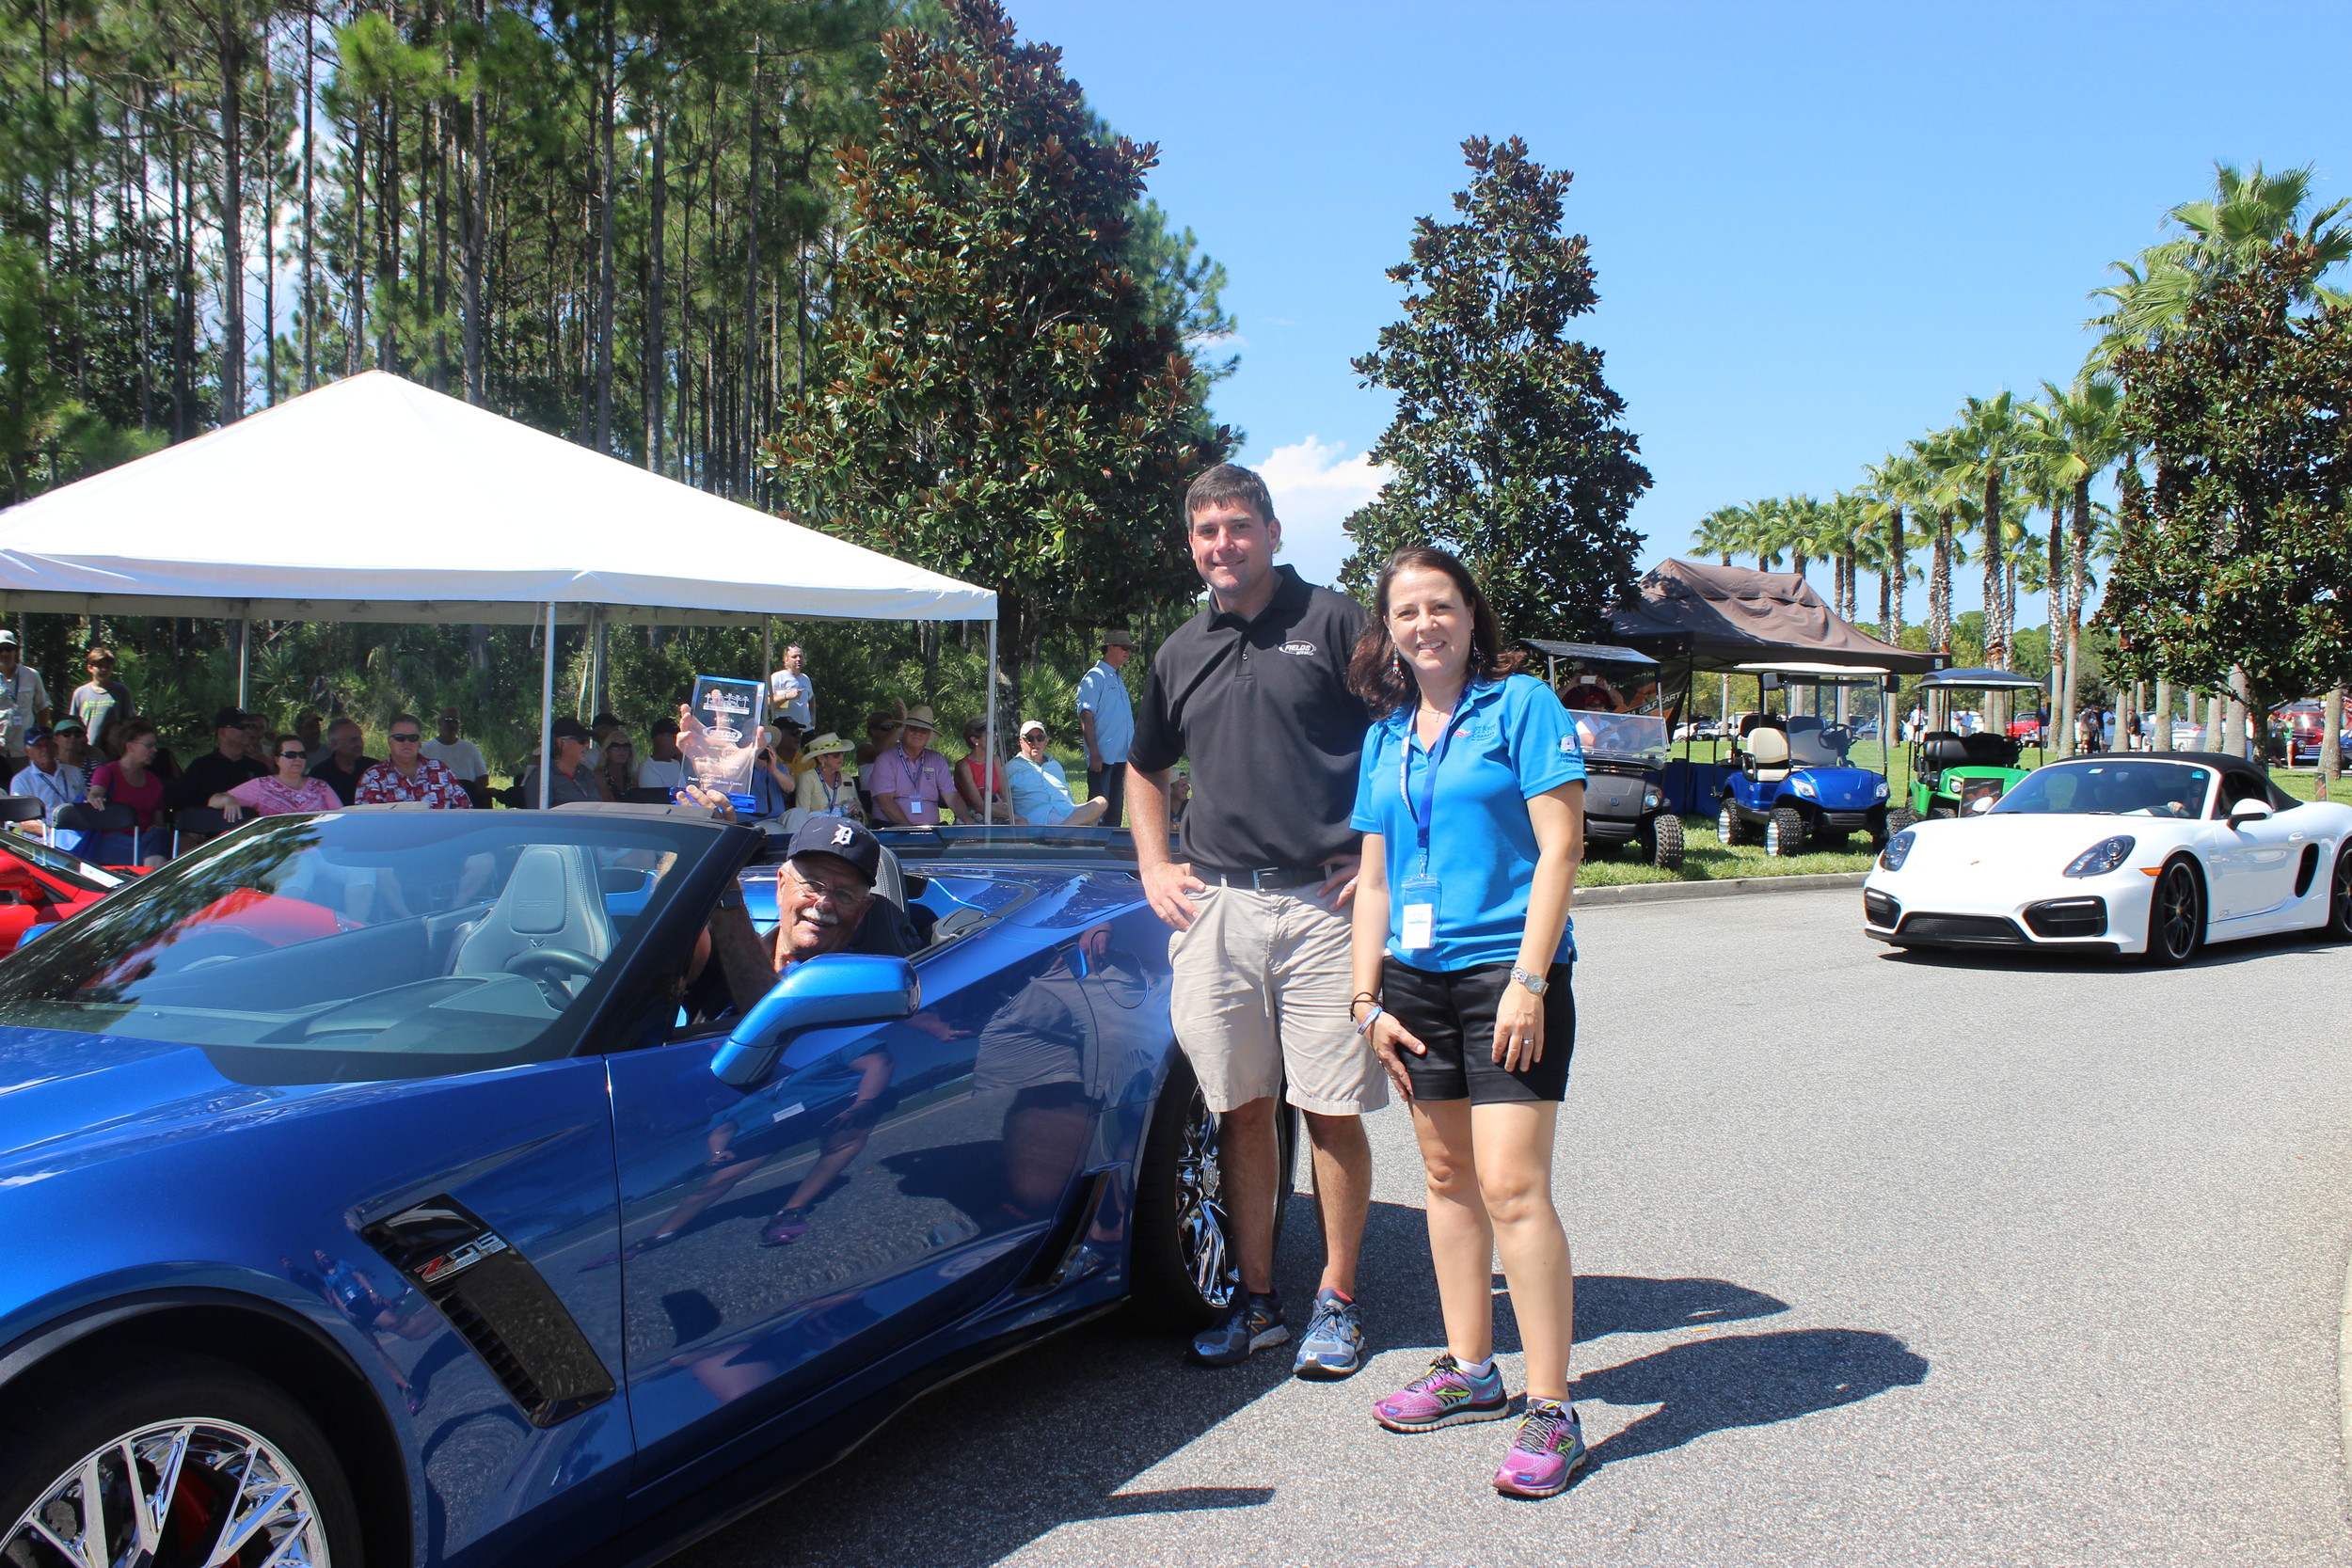 Future Classic Best New Corvette sponsored by Ponte Vedra Wellness Center: Fred Porter, with Isabelle Rodriguez and Brandon Starks